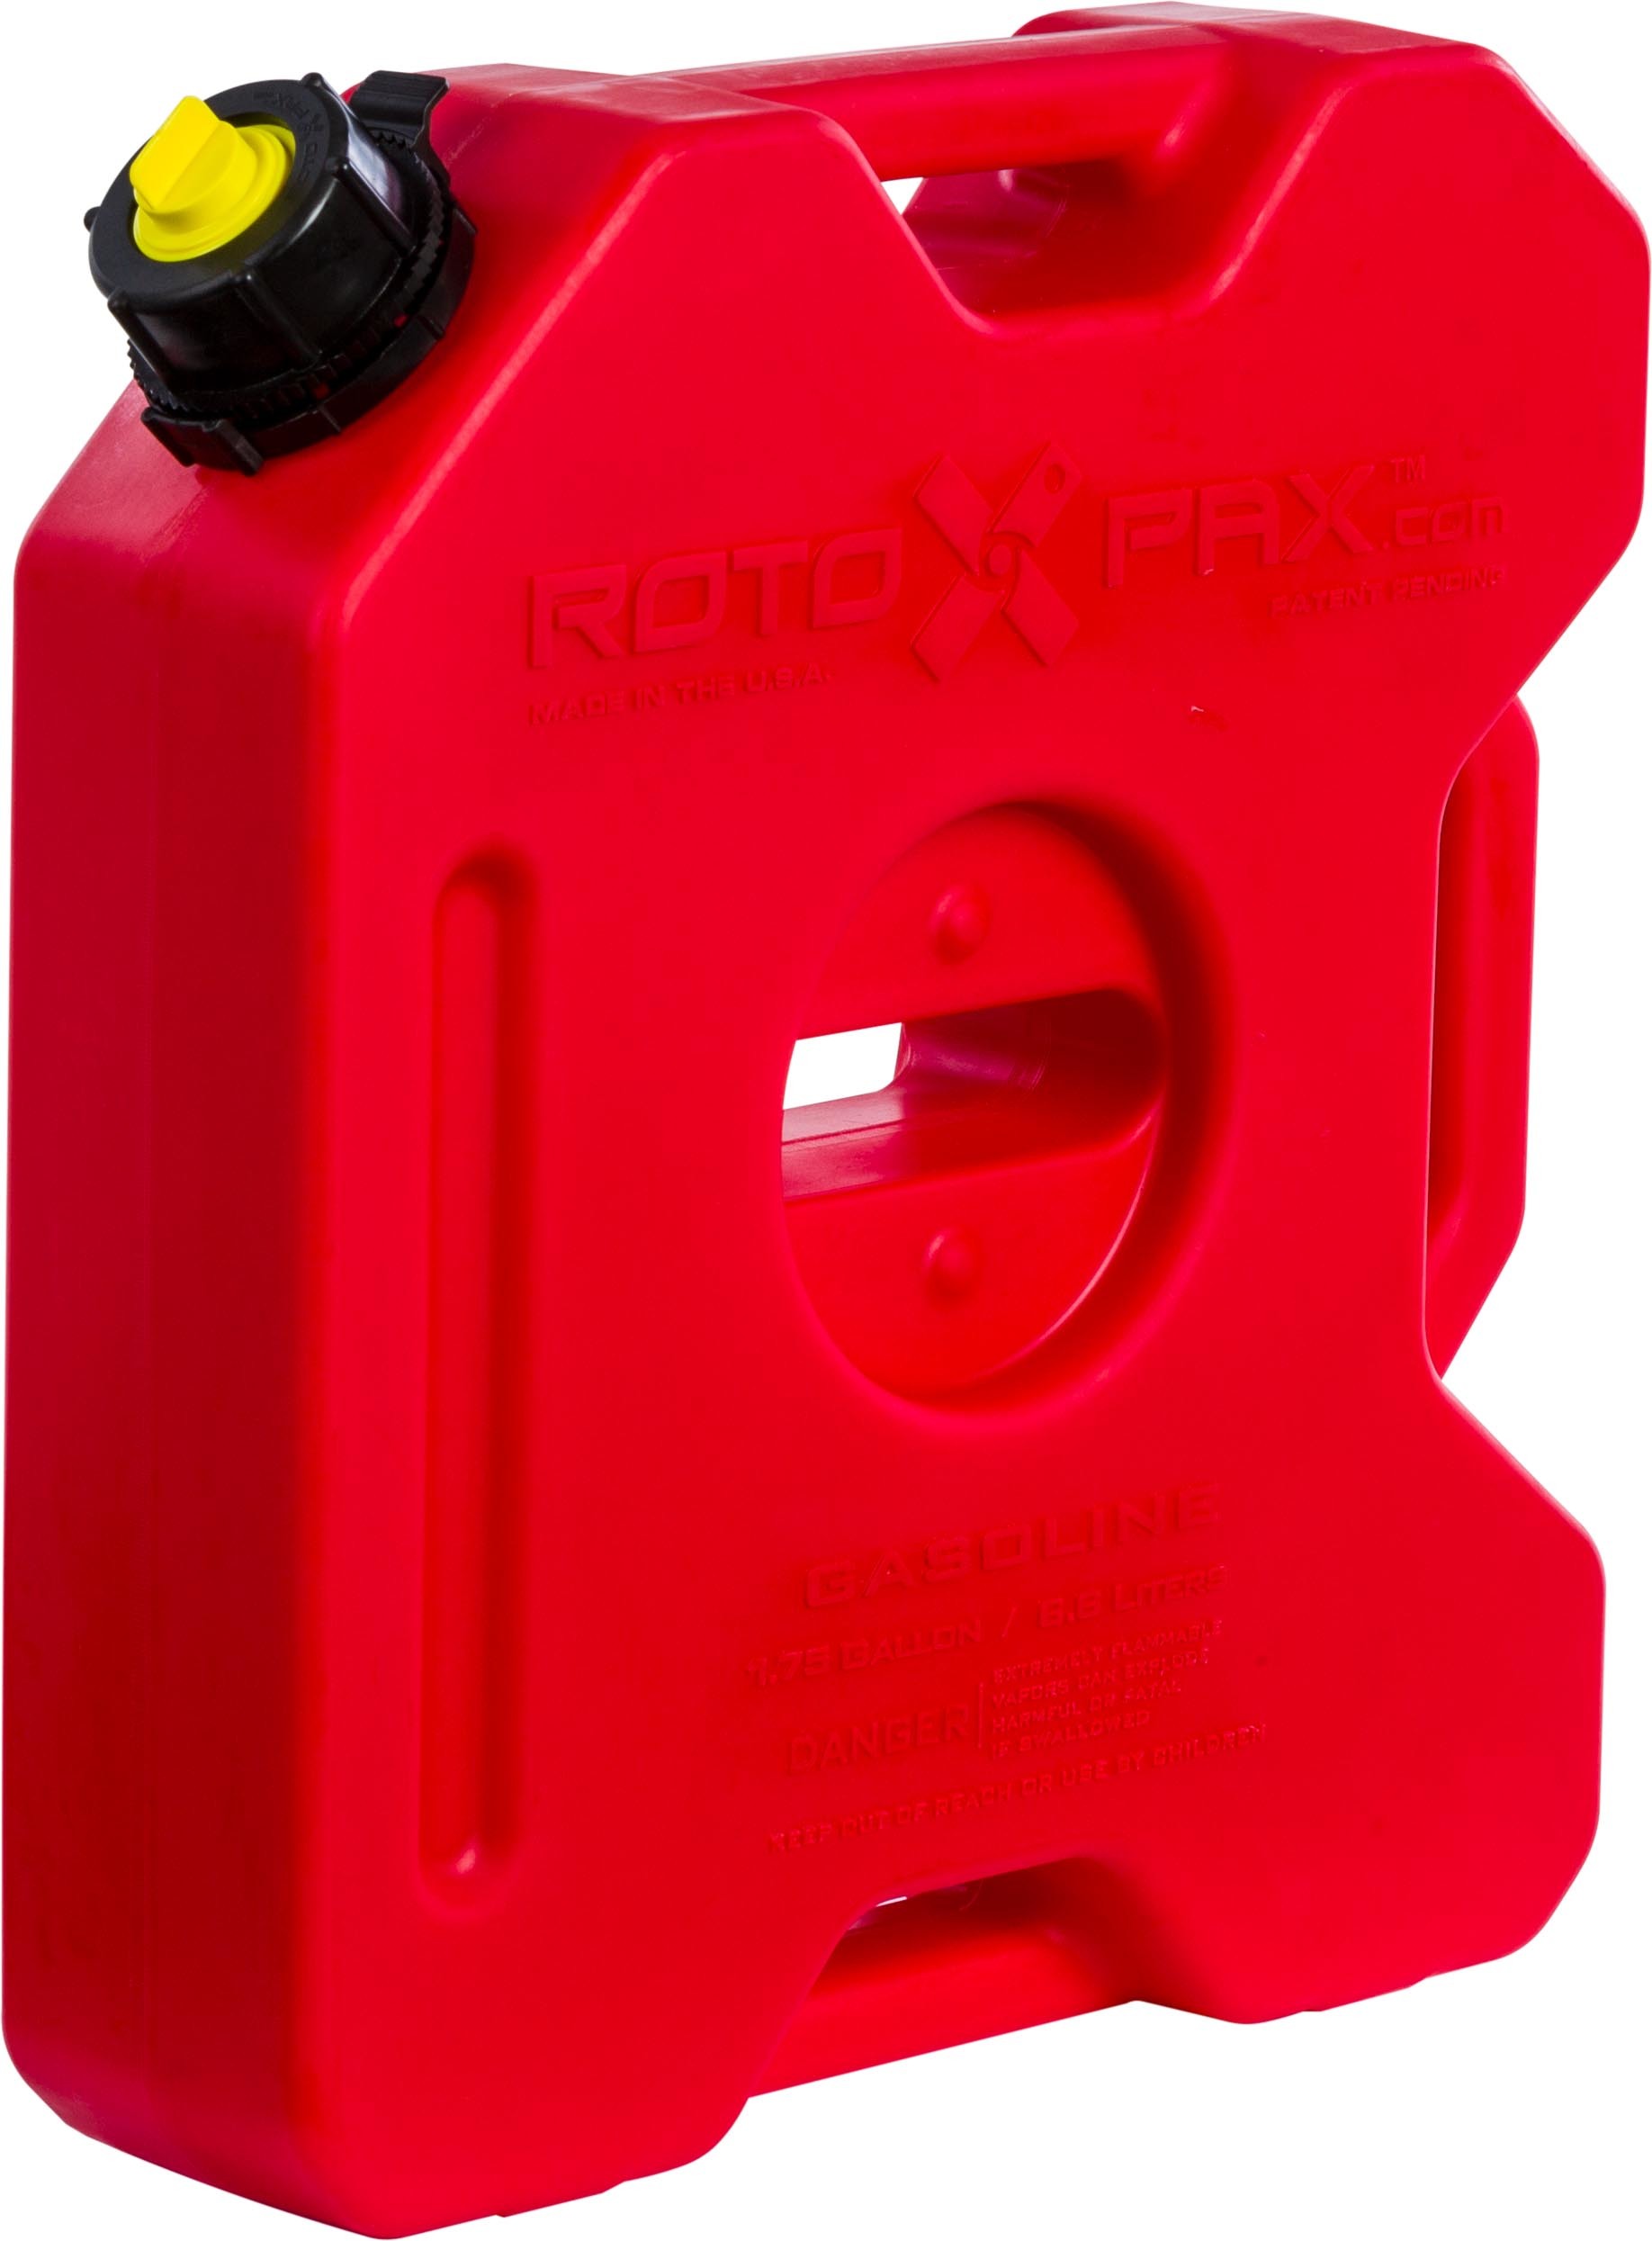 Rotopax - Fuel Container 1.75 Gal Carb - RX-1.75G - CARB